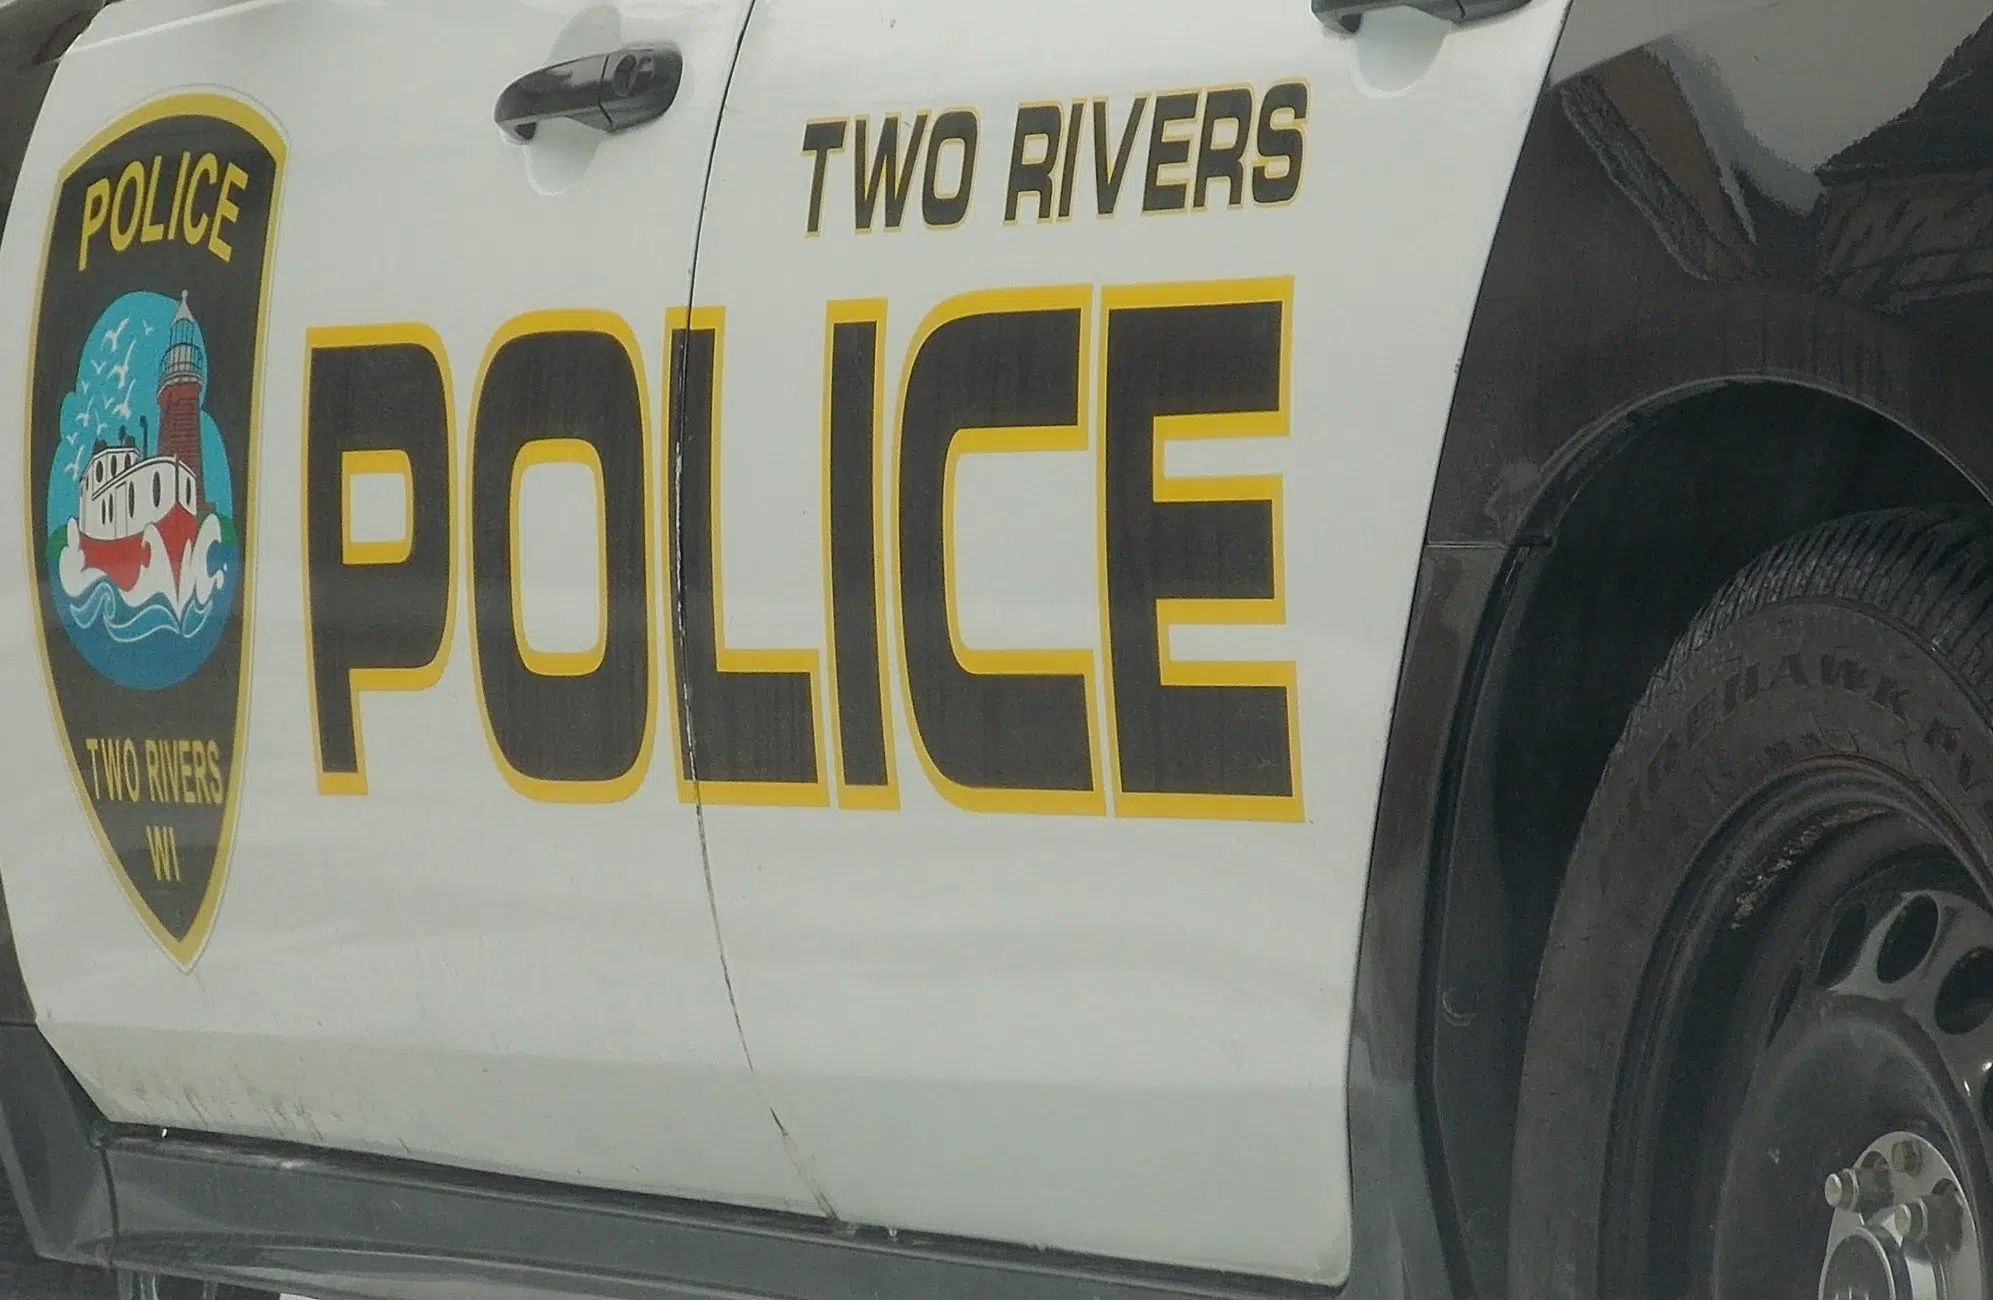 Man Attempts to Abduct Two Boys in Two Rivers